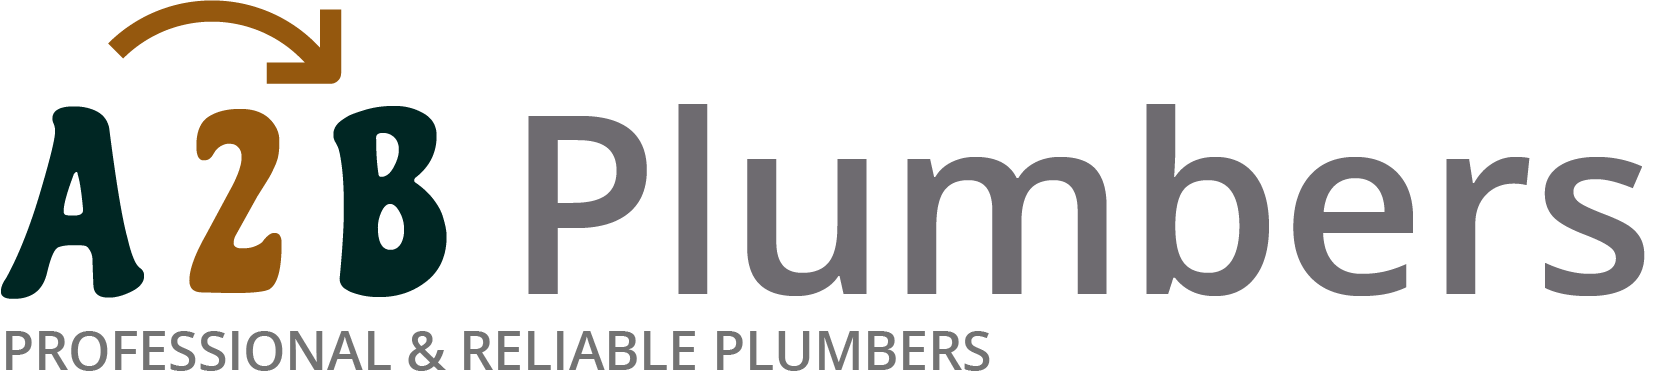 If you need a boiler installed, a radiator repaired or a leaking tap fixed, call us now - we provide services for properties in Sudbury and the local area.